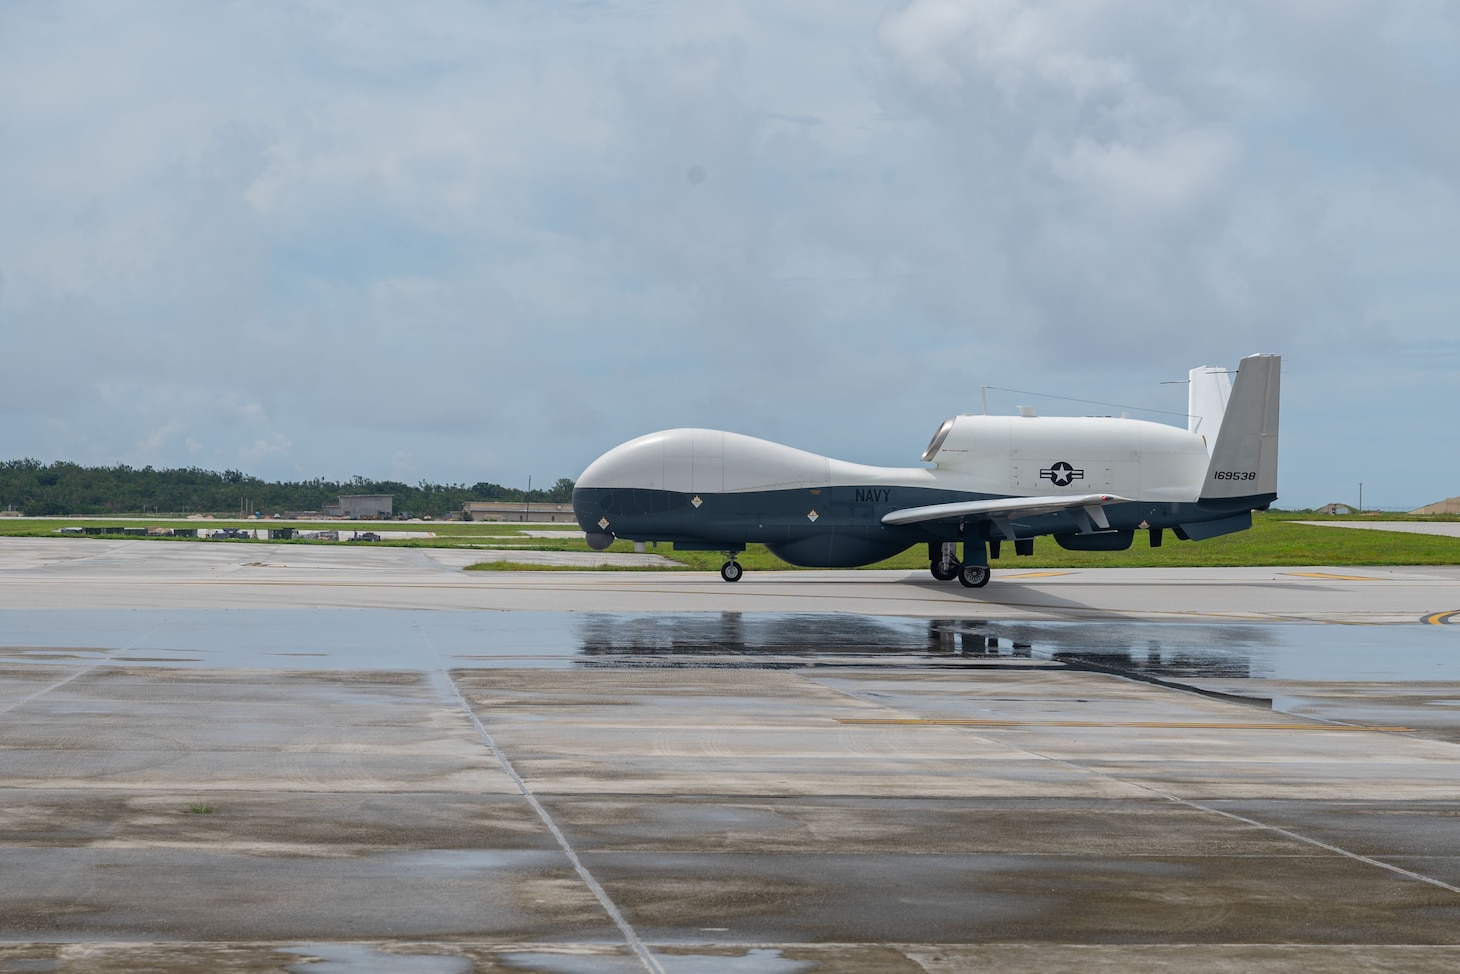 An MQ-4C Triton Unmanned Aircraft System (UAS) assigned to Unmanned Patrol Squadron 19 (VUP-19), taxis after landing on Andersen Air Force Base. VUP-19, the first Triton unmanned aircraft systems squadron, will operate and maintain aircraft in Guam as part of the MQ-4C’s initial operational capability (IOC).